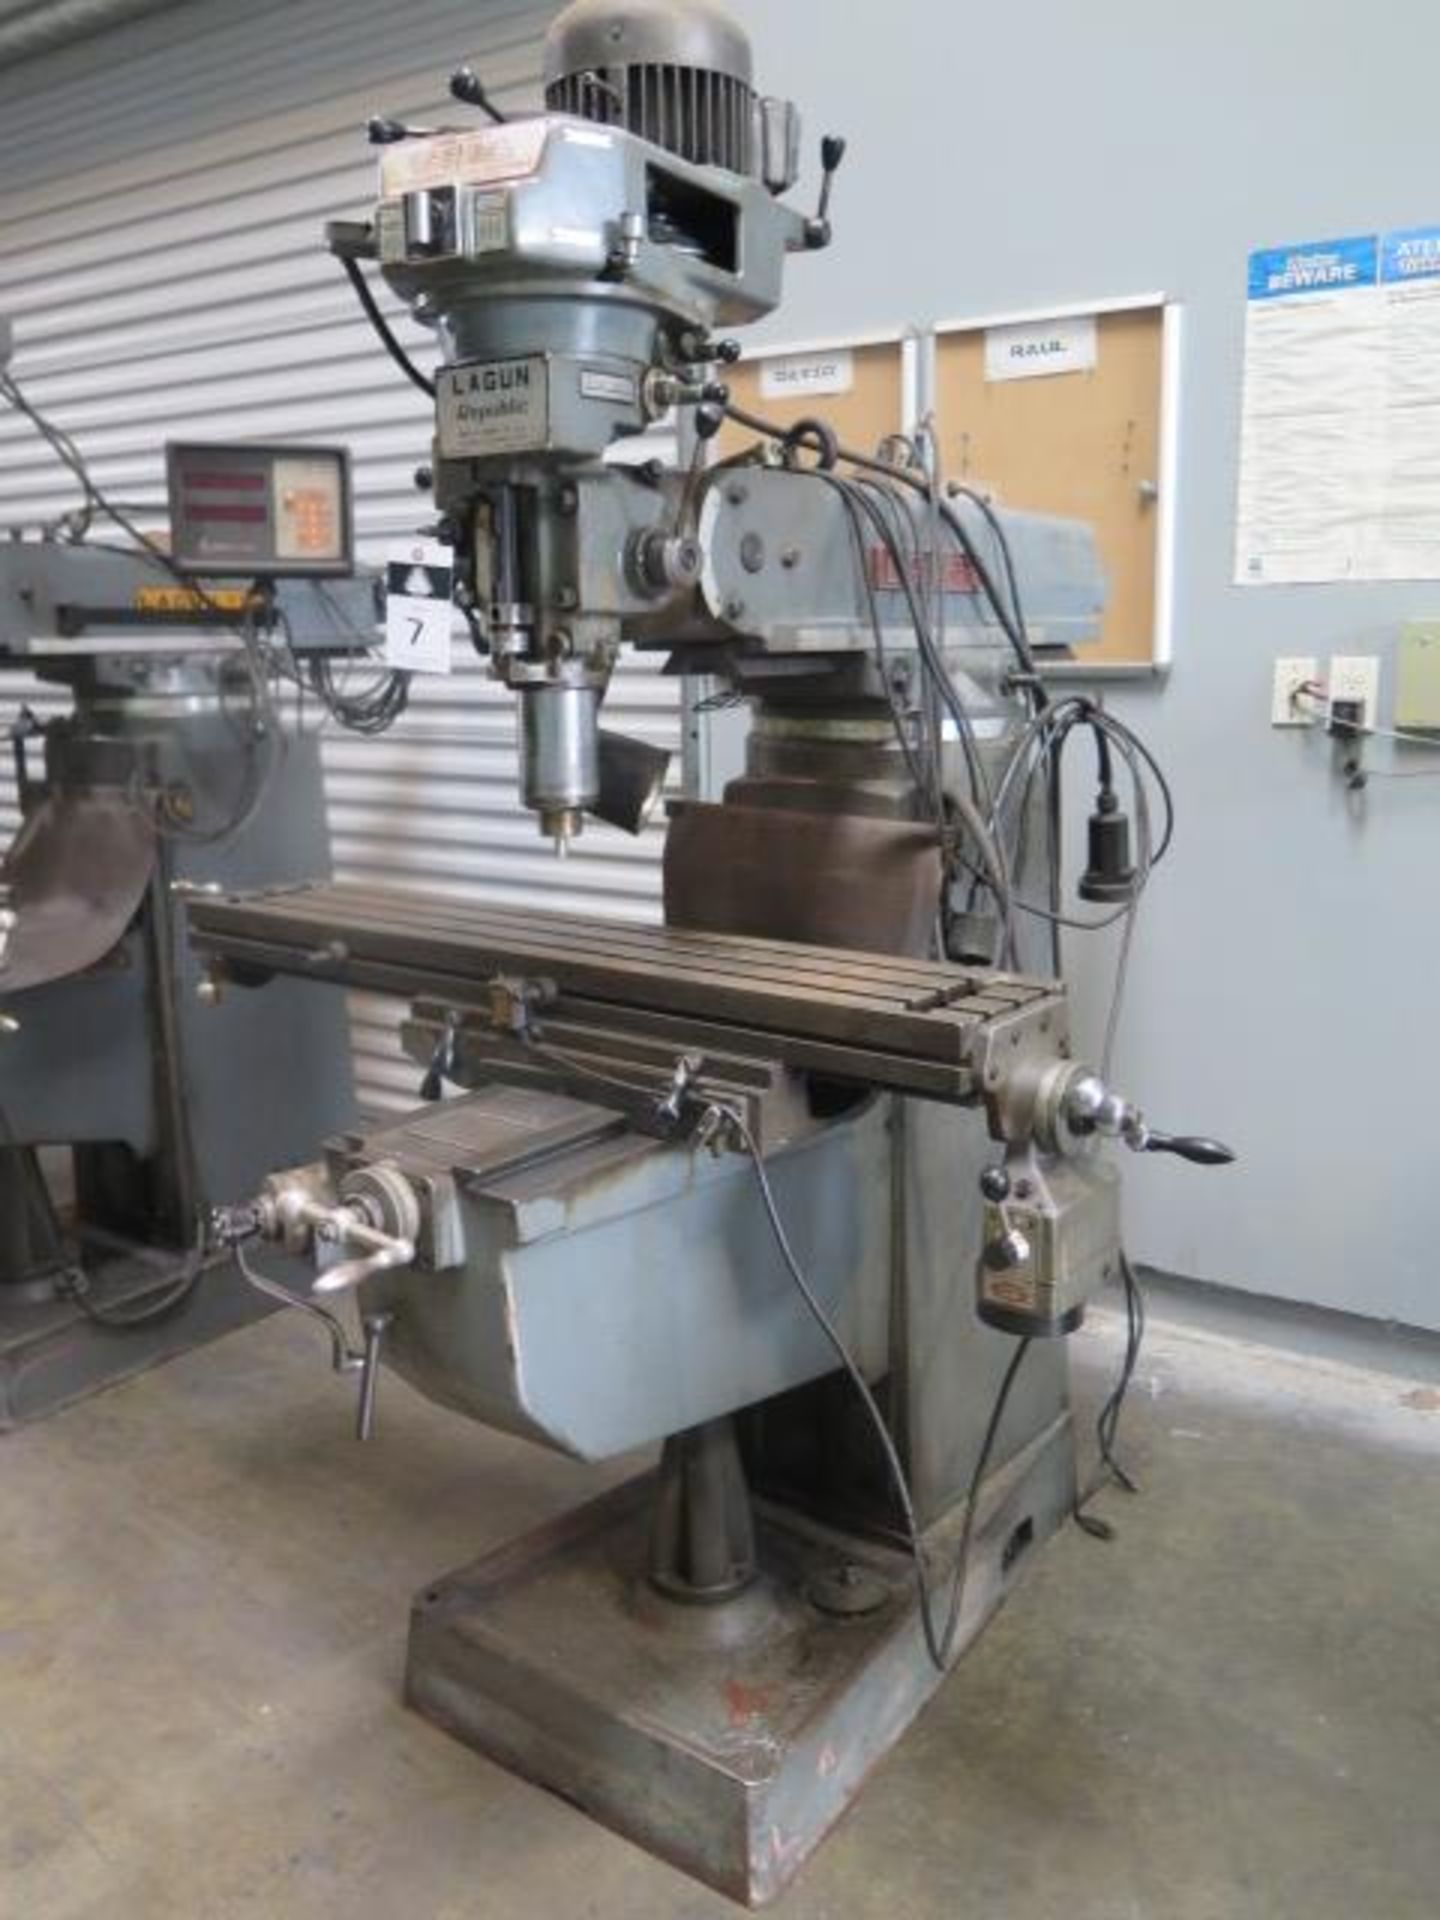 Lagun FT-2 Vertical Mill w/ 55-2940 RPM, 8-Speeds, Chrome Ways, Power Feed, 9” x 48” SOLD AS IS - Image 2 of 10